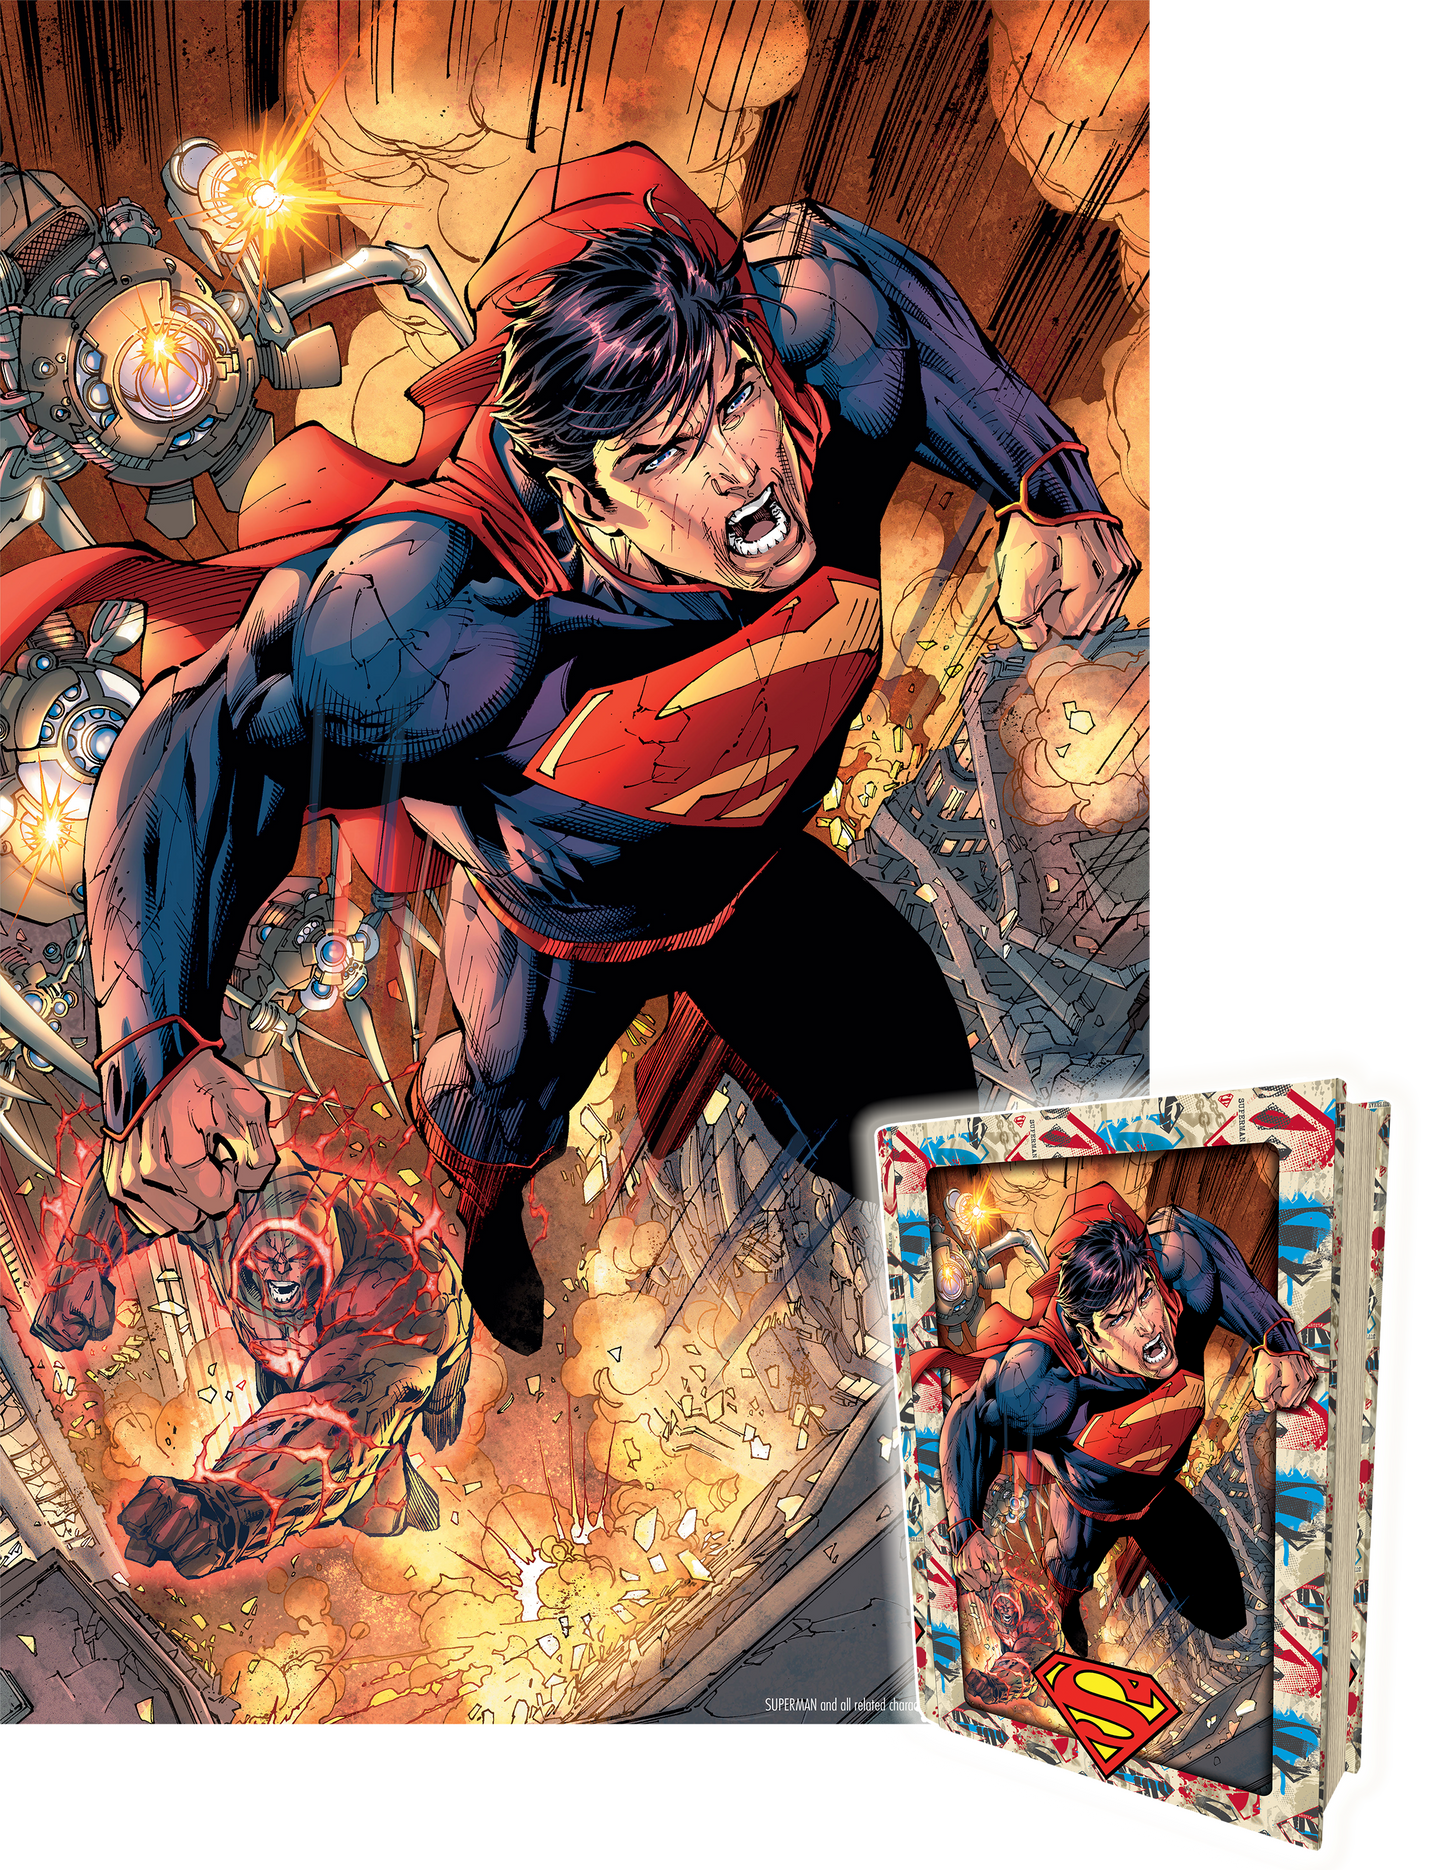 Superman DC Comics 3D Jigsaw Puzzle in Tin Book Packaging 35622 300pc 18x12"